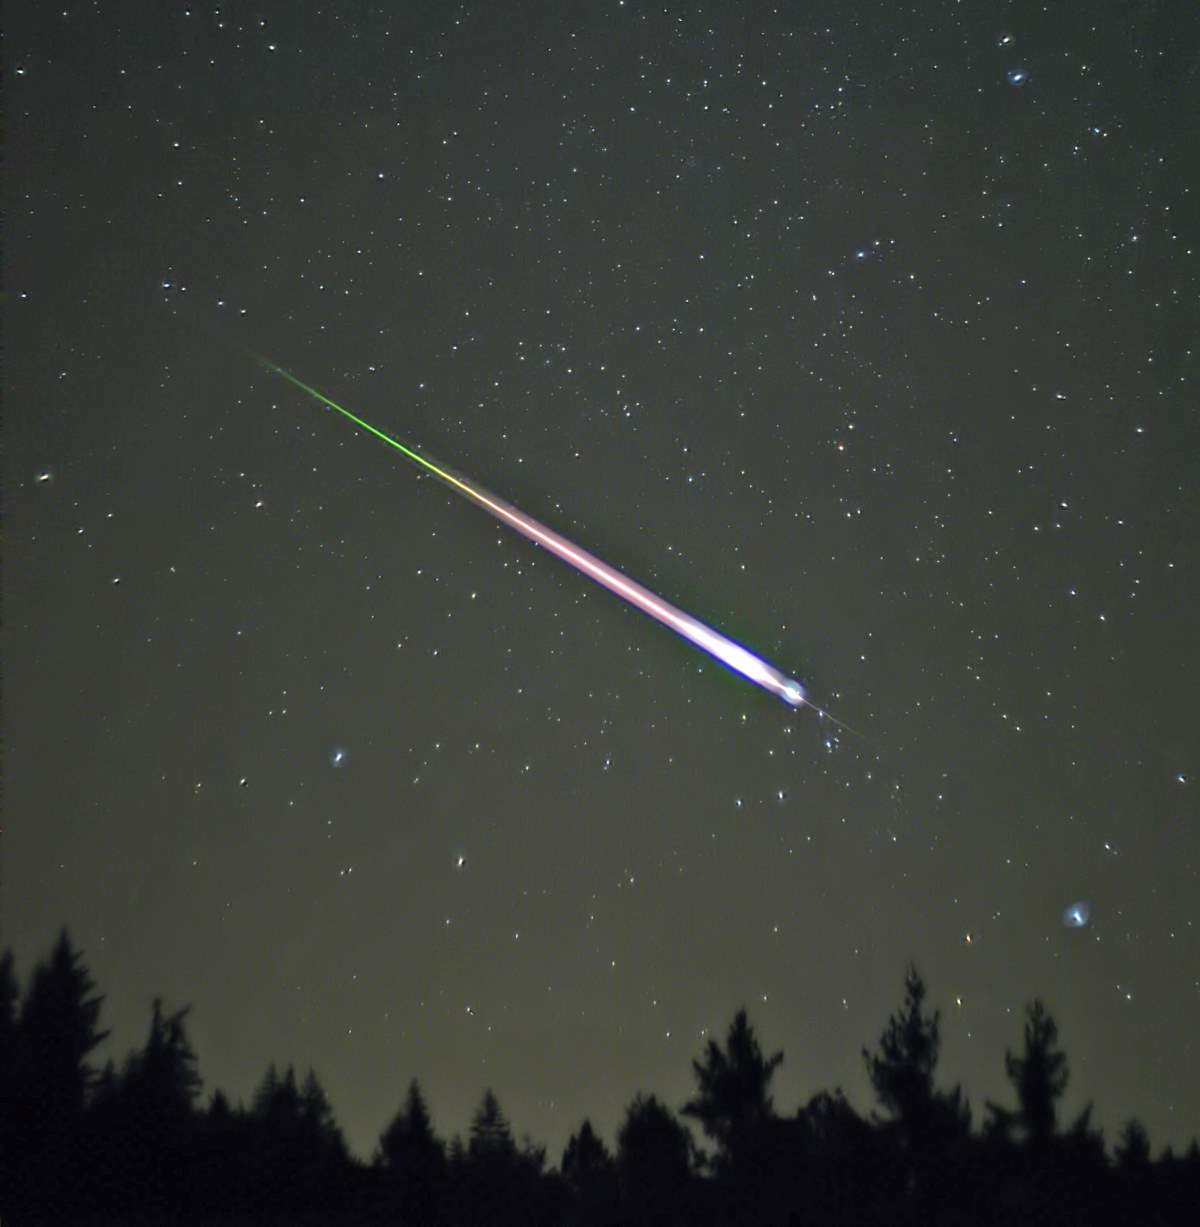 Earth & Solar System Facts: A Leonid meteor